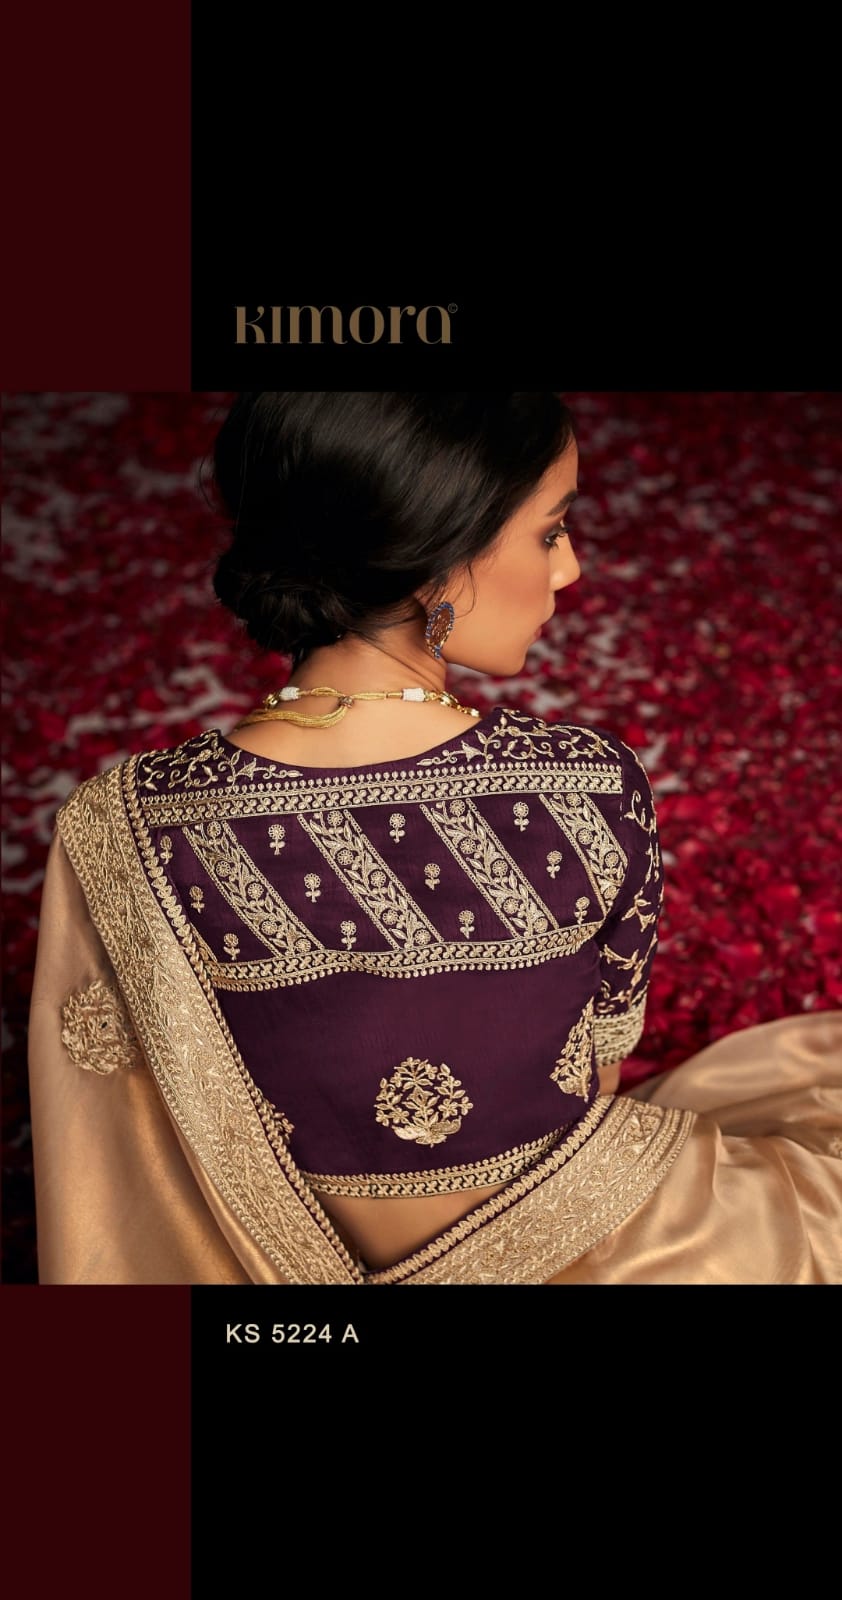 What type of earring should I wear with a purple saree? - Quora